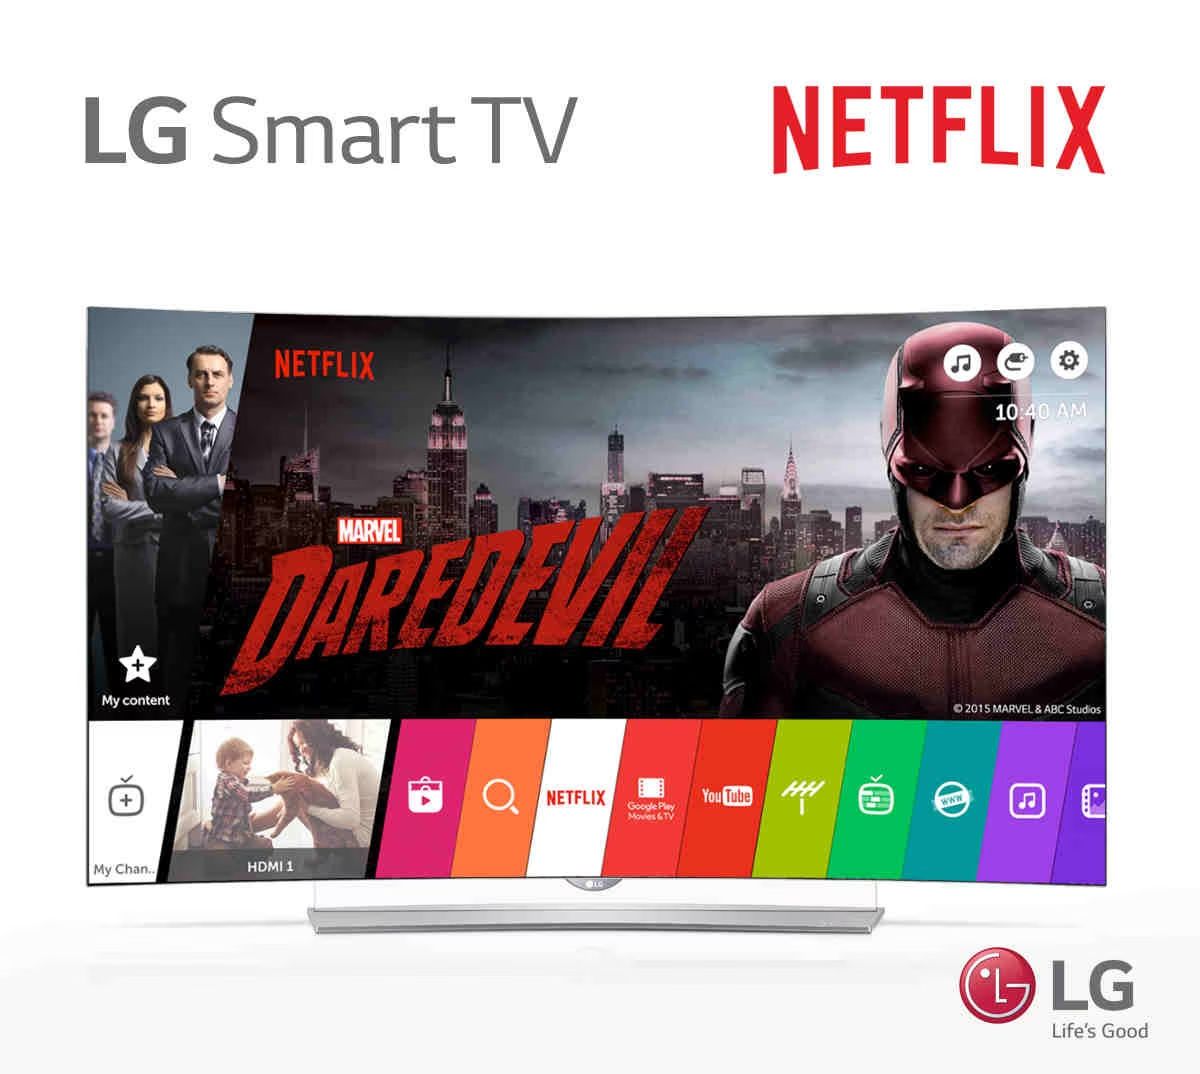 How To Get Netflix On LG Smart TV